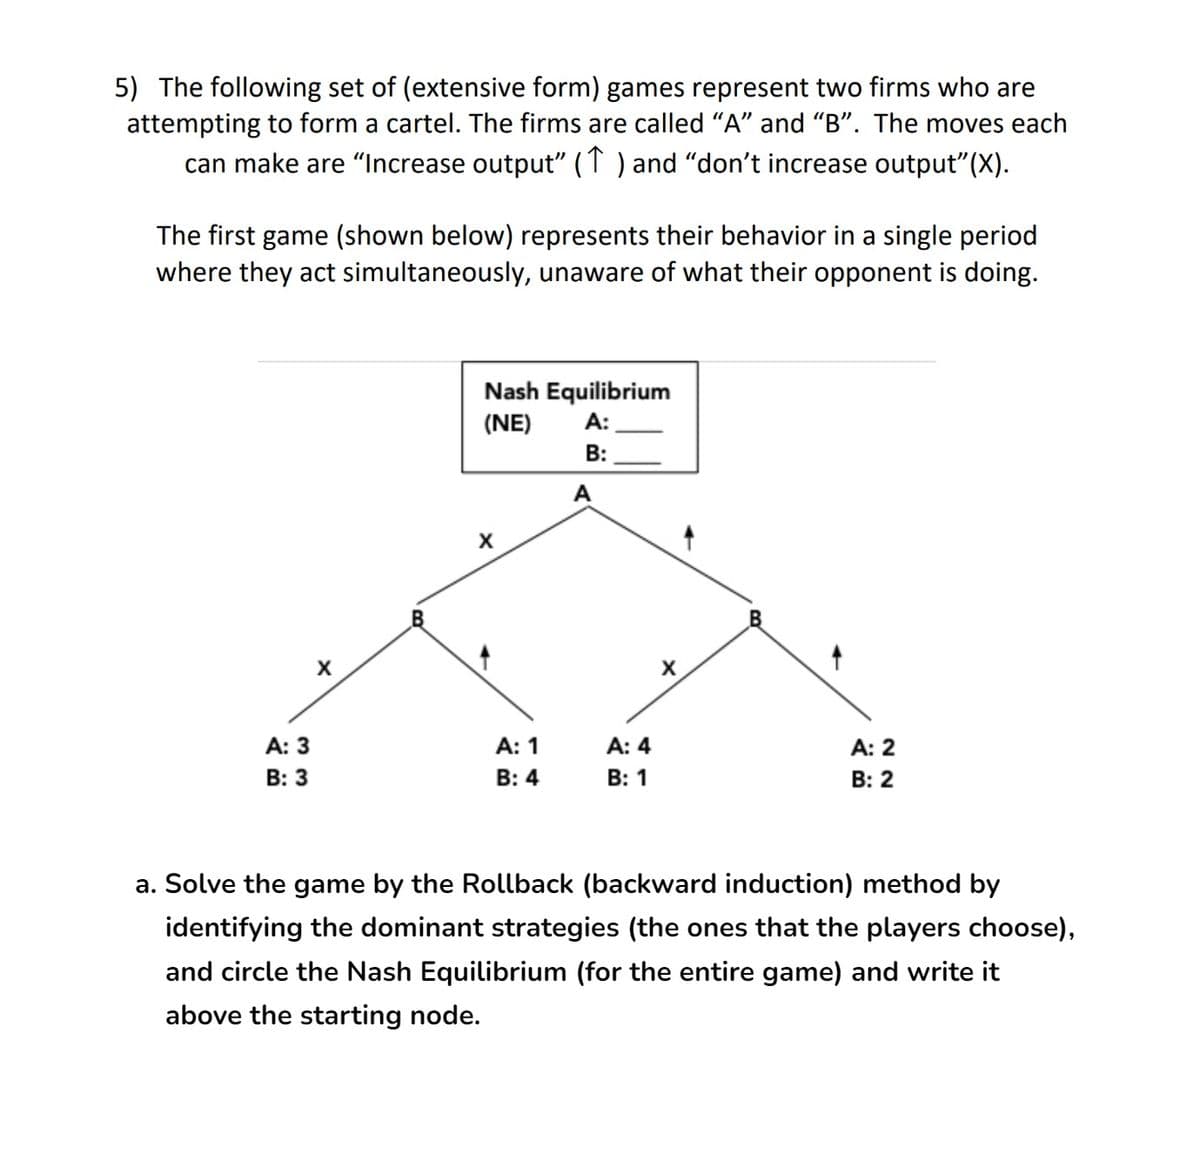 5) The following set of (extensive form) games represent two firms who are
attempting to form a cartel. The firms are called "A" and "B". The moves each
can make are "Increase output" (1) and “don't increase output" (X).
The first game (shown below) represents their behavior in a single period
where they act simultaneously, unaware of what their opponent is doing.
Nash Equilibrium
(NE)
A:
B:
A: 3
A: 1
A: 4
A: 2
B: 3
B: 4
B: 1
B: 2
a. Solve the game by the Rollback (backward induction) method by
identifying the dominant strategies (the ones that the players choose),
and circle the Nash Equilibrium (for the entire game) and write it
above the starting node.
X
X
A
X